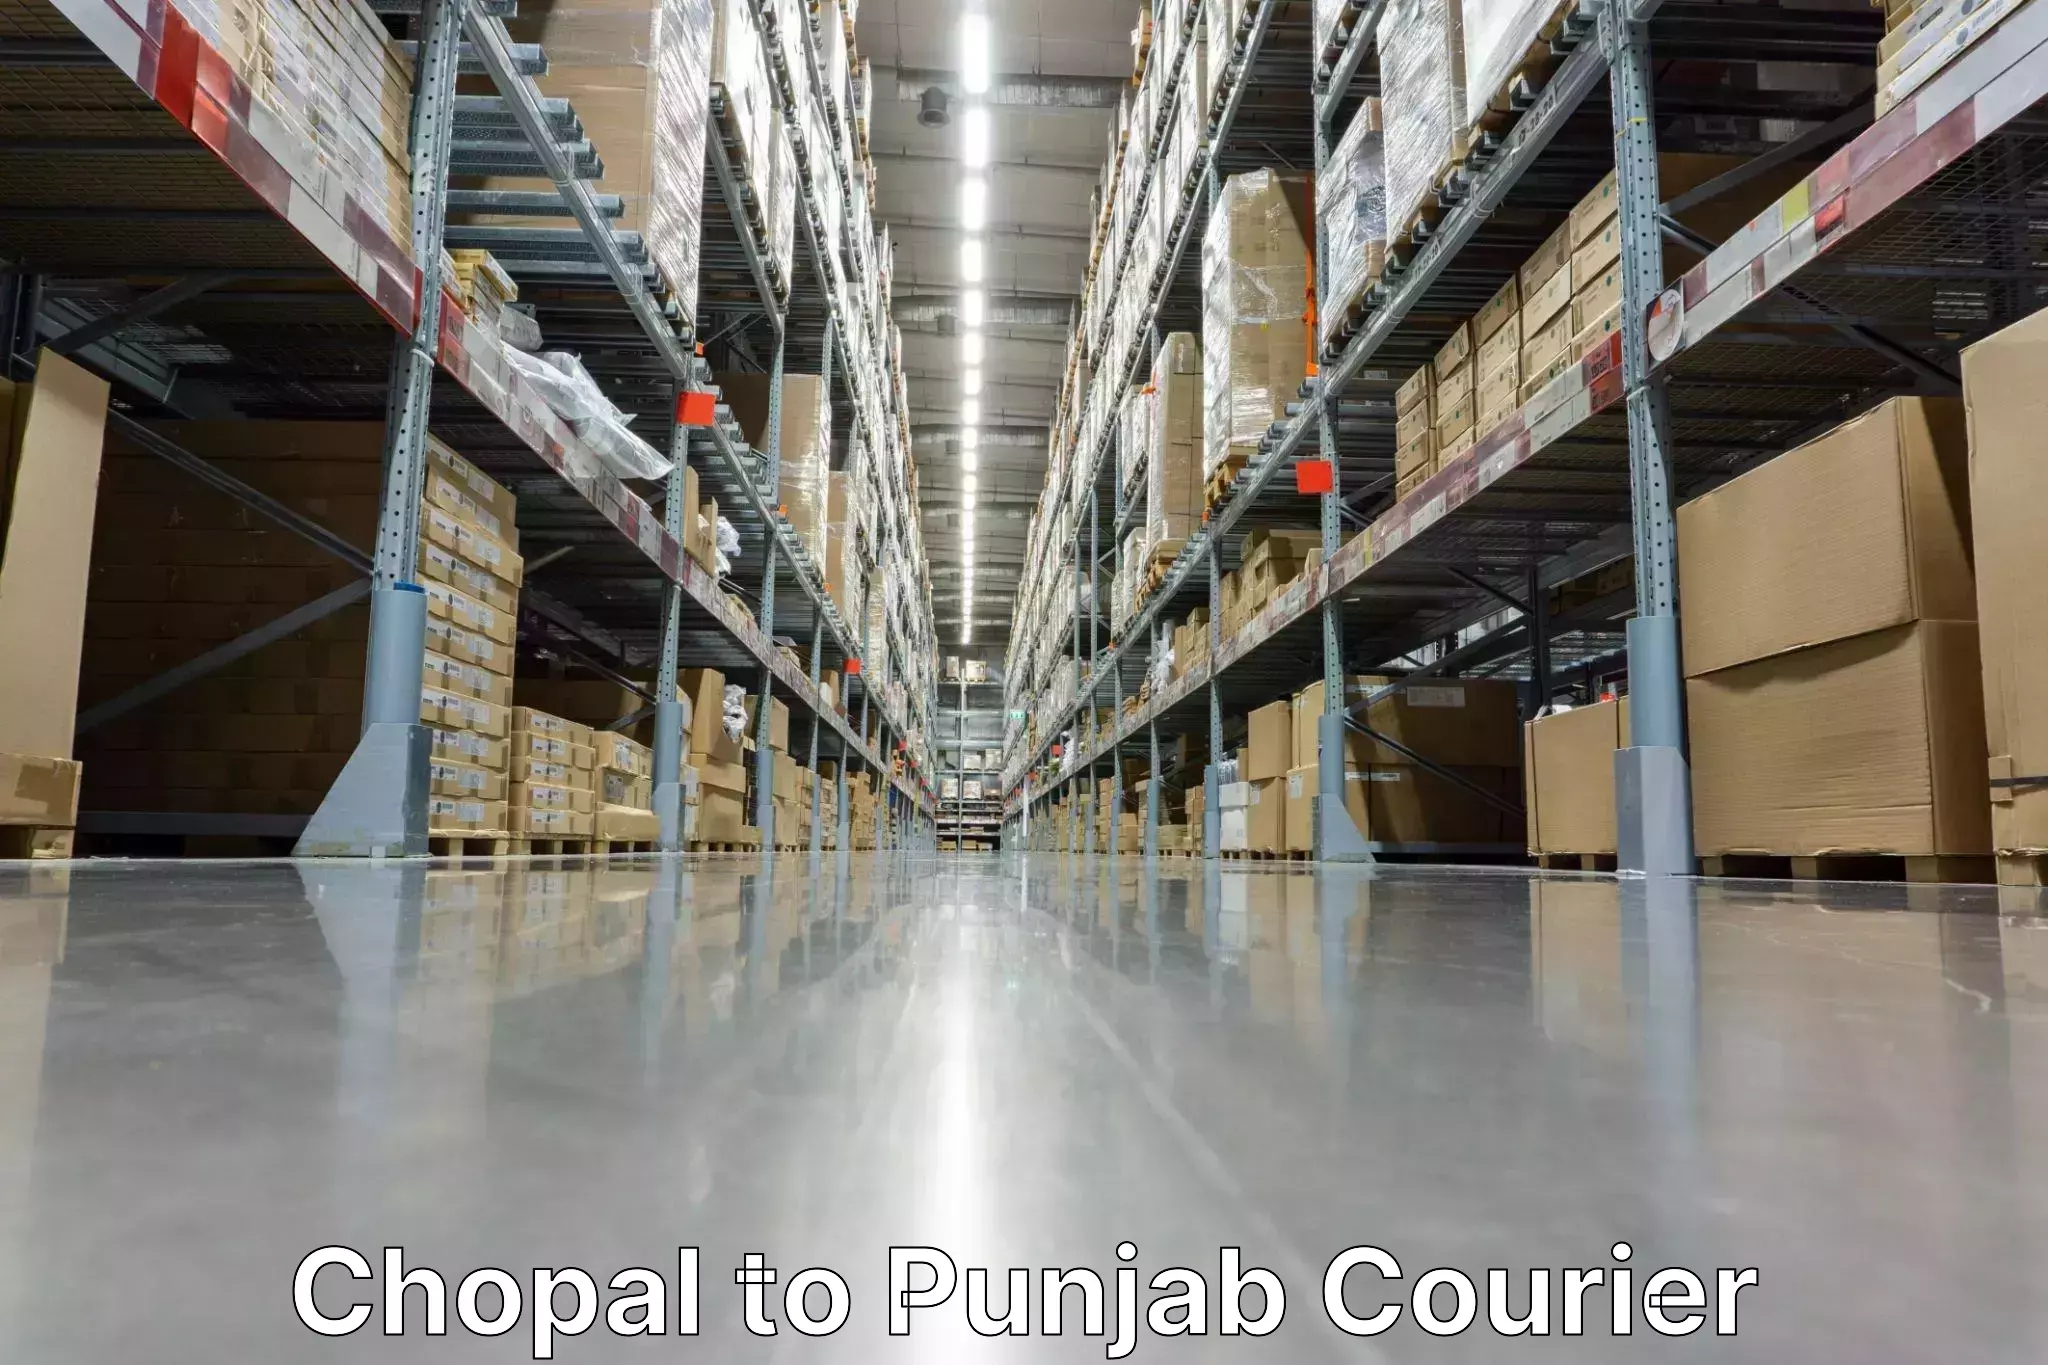 Courier service innovation Chopal to Punjab